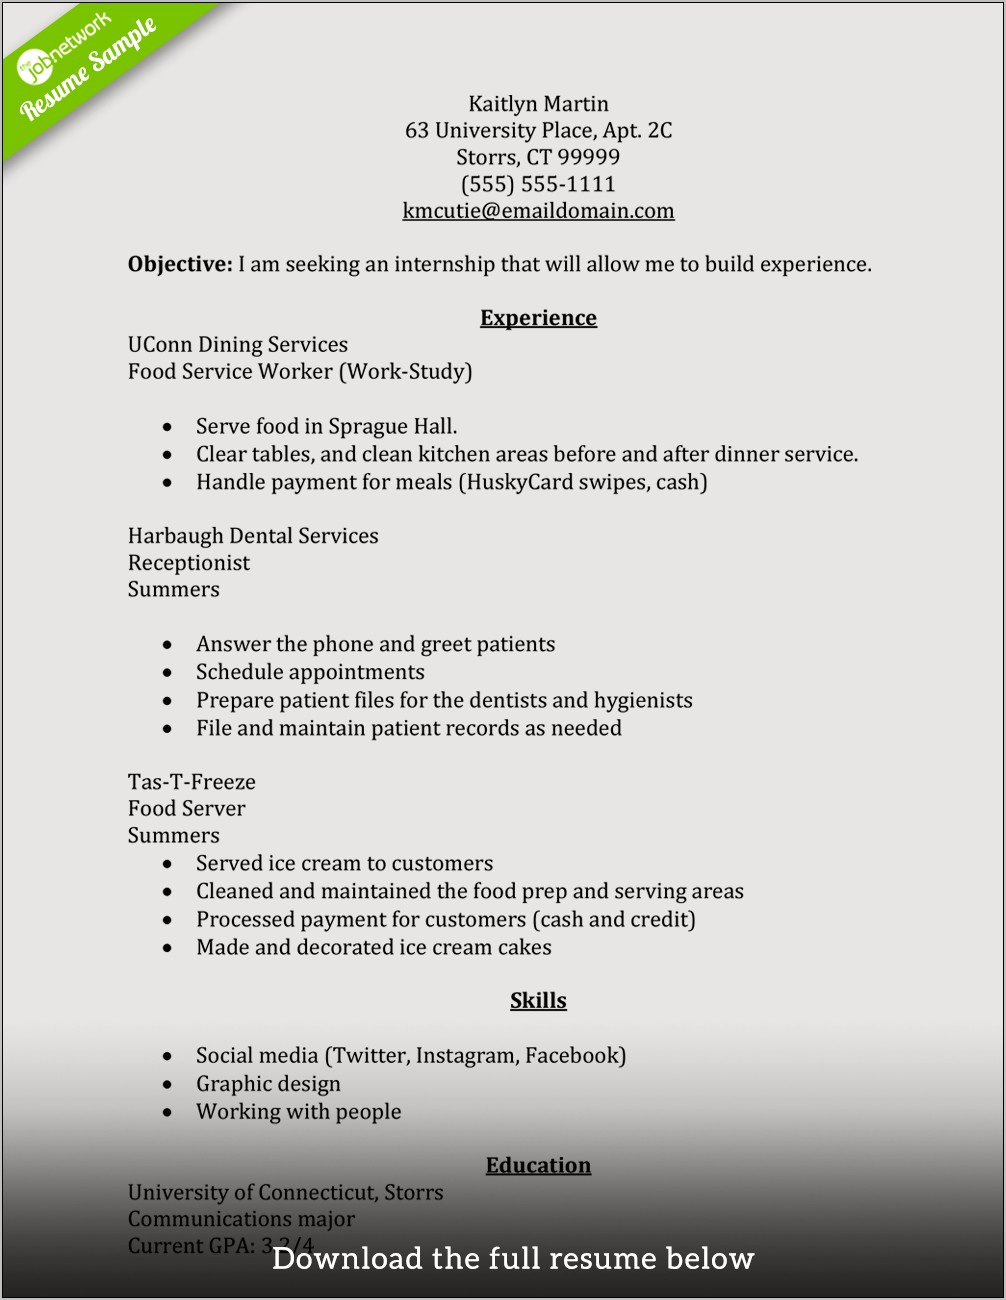 Professional Summary For Resume No Work Experience Examples